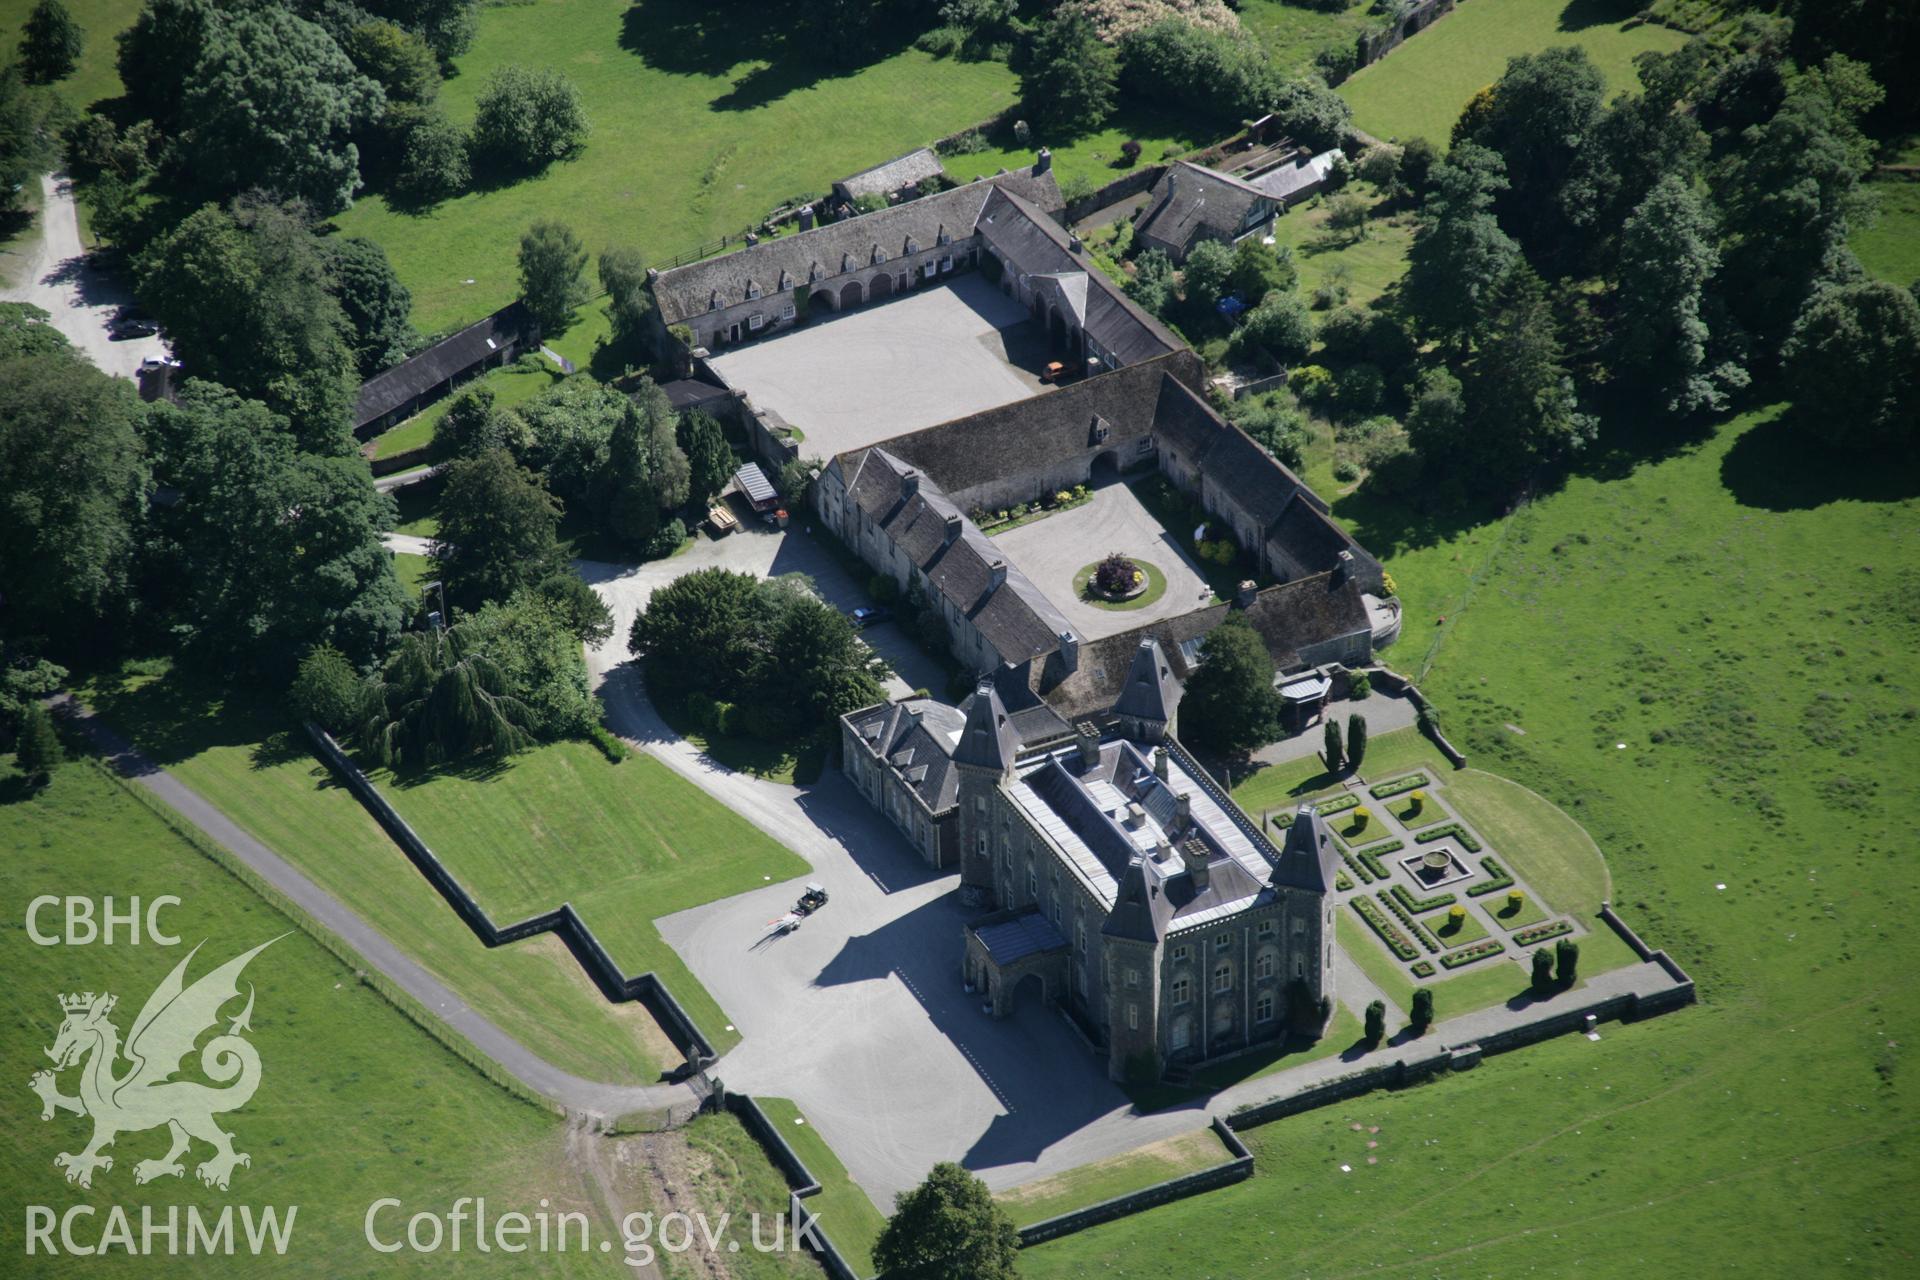 RCAHMW colour oblique aerial photograph of Newton House, (Dinefwr Park) Llandeilo, viewed from the north. Taken on 22 June 2005 by Toby Driver